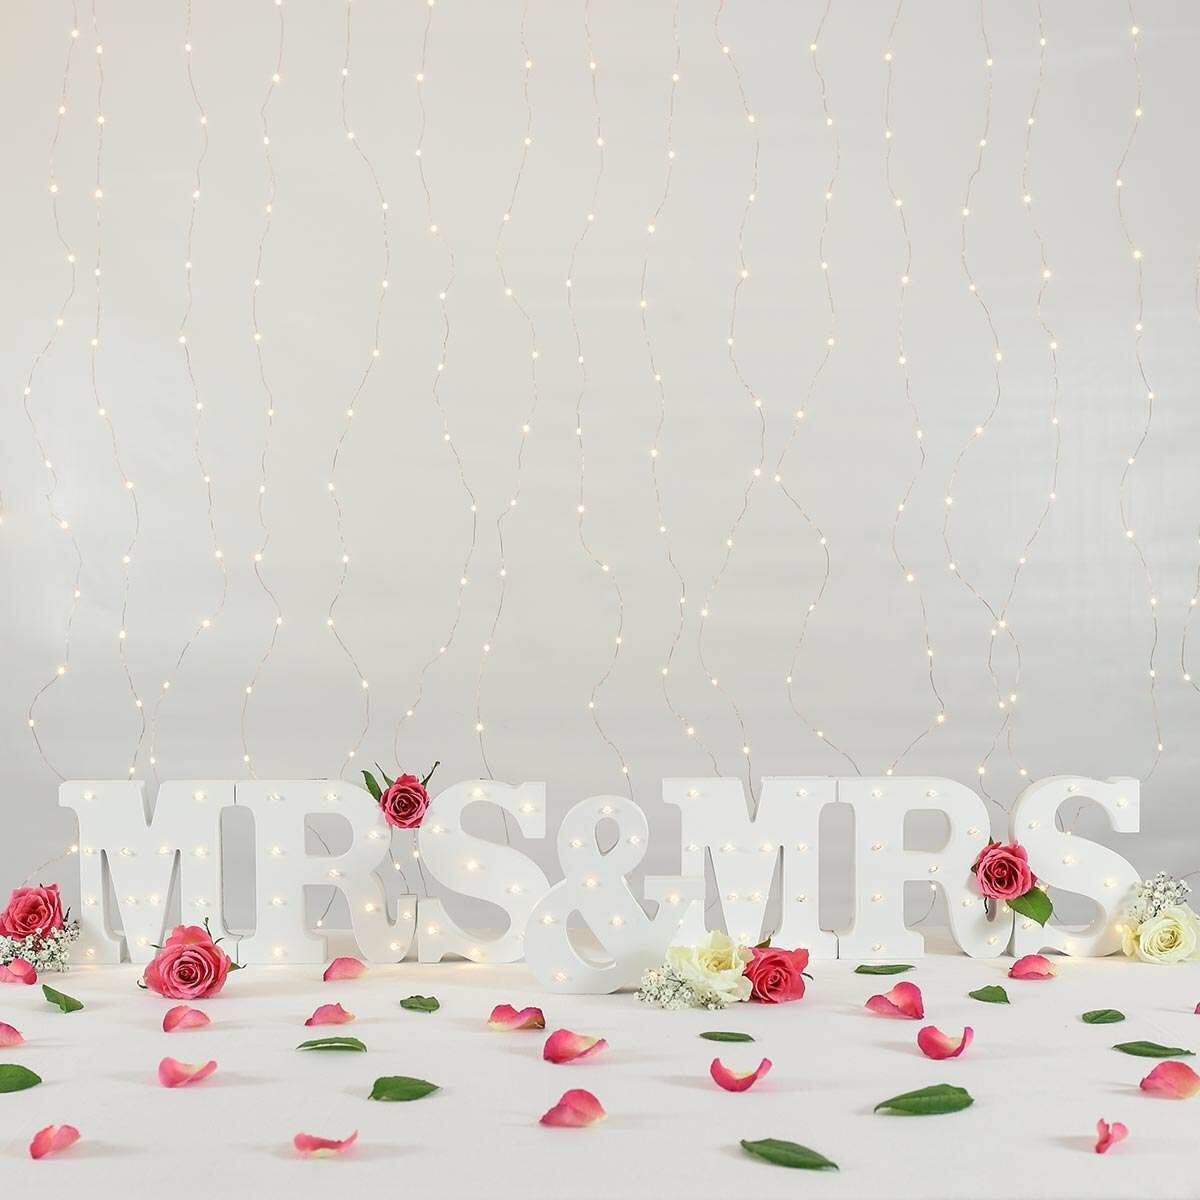 Mrs & Mrs Battery Light Up Circus Letters, Warm White LEDs image 1